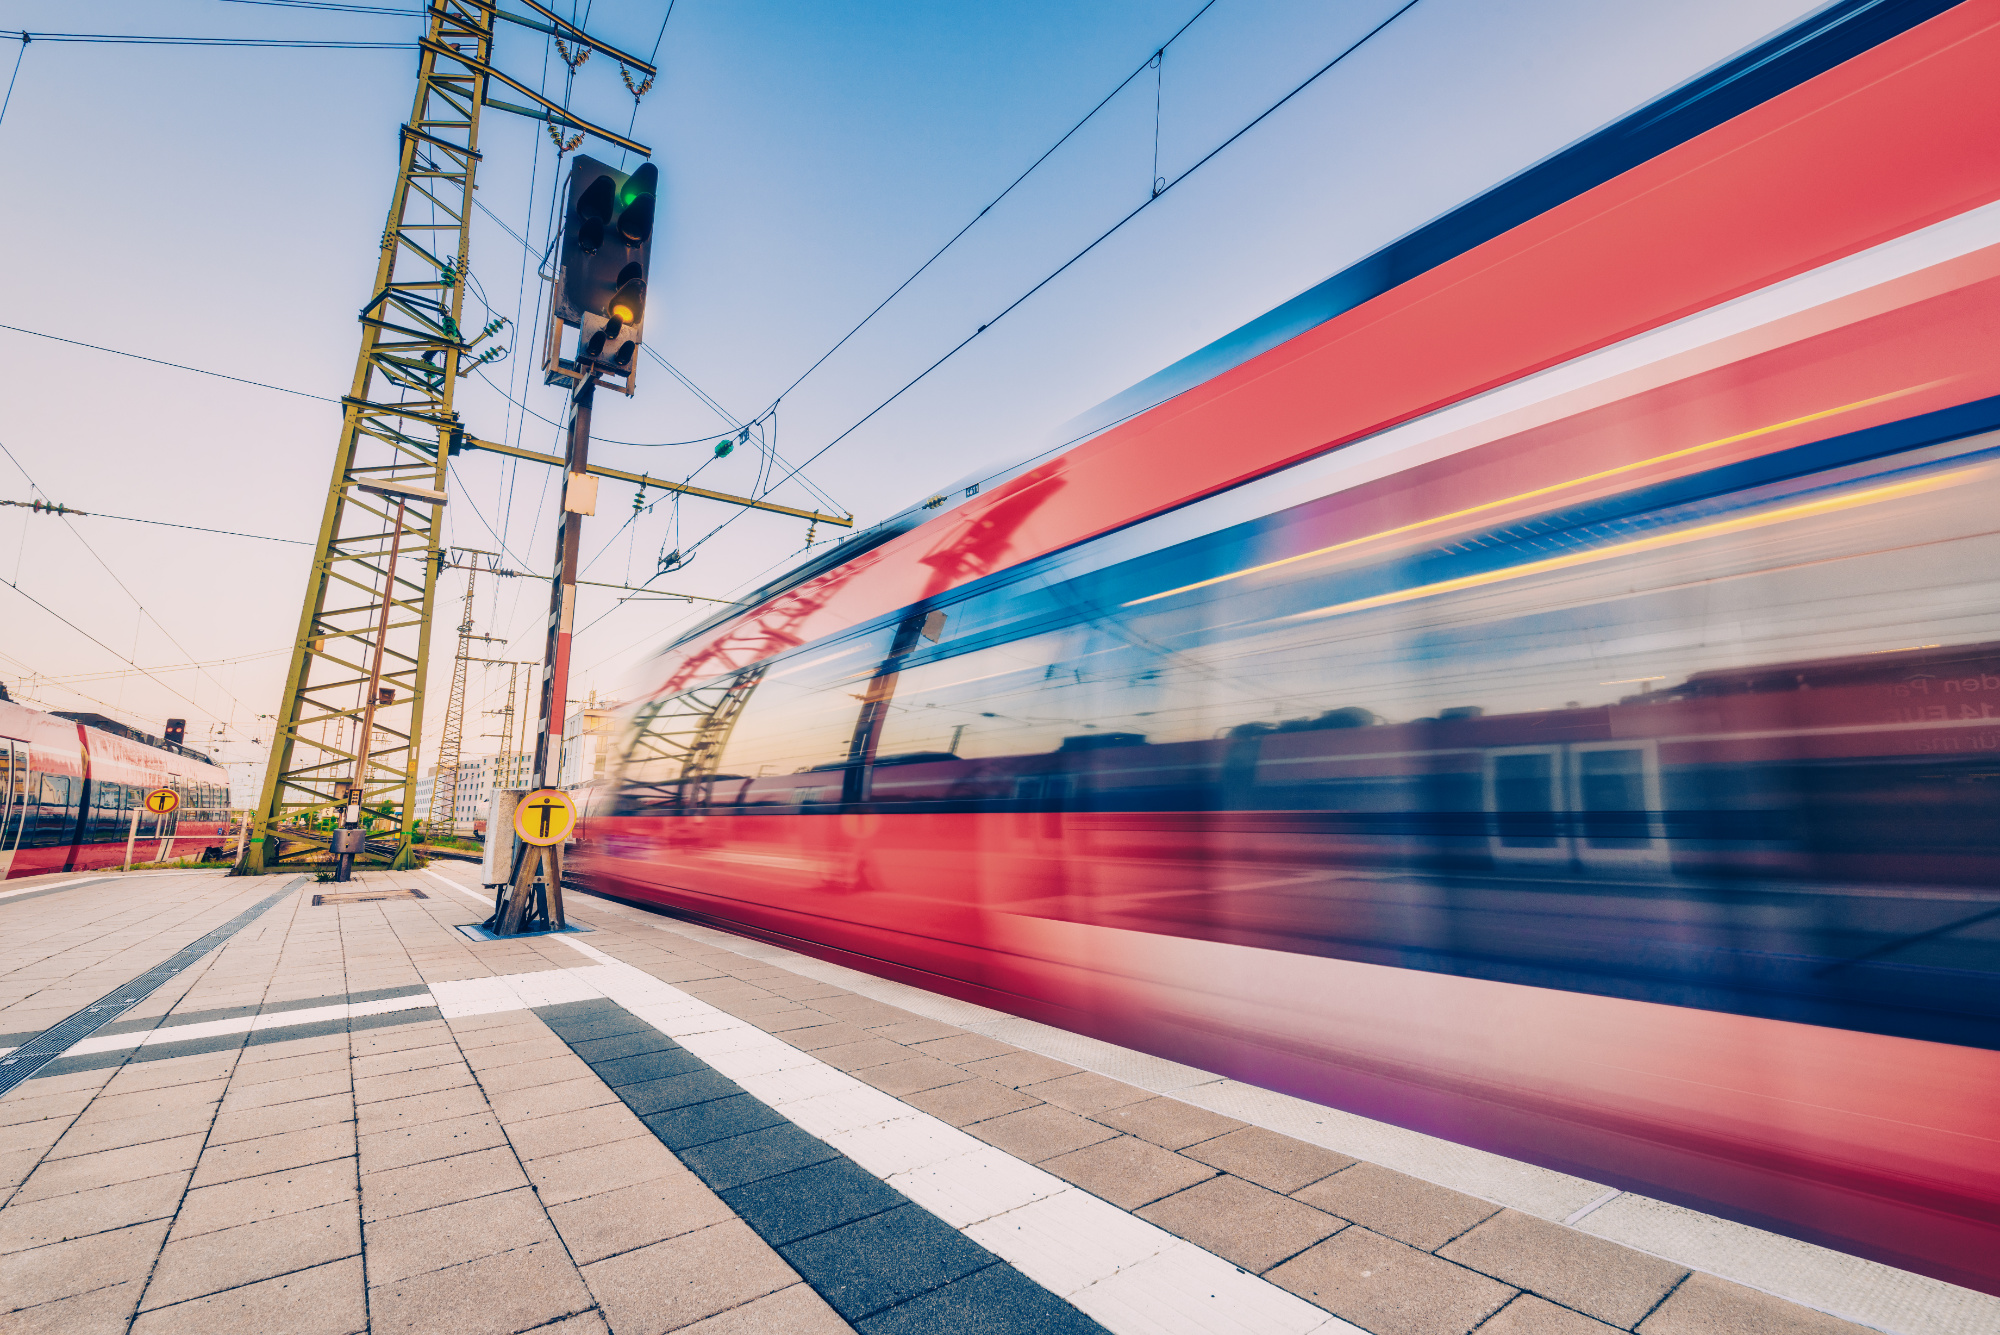 High speed train in motion on the railway station at sunset. Red blurred modern intercity train on the railway platform in Europe. Passenger railway transportation. Railroad in the evening. Travel